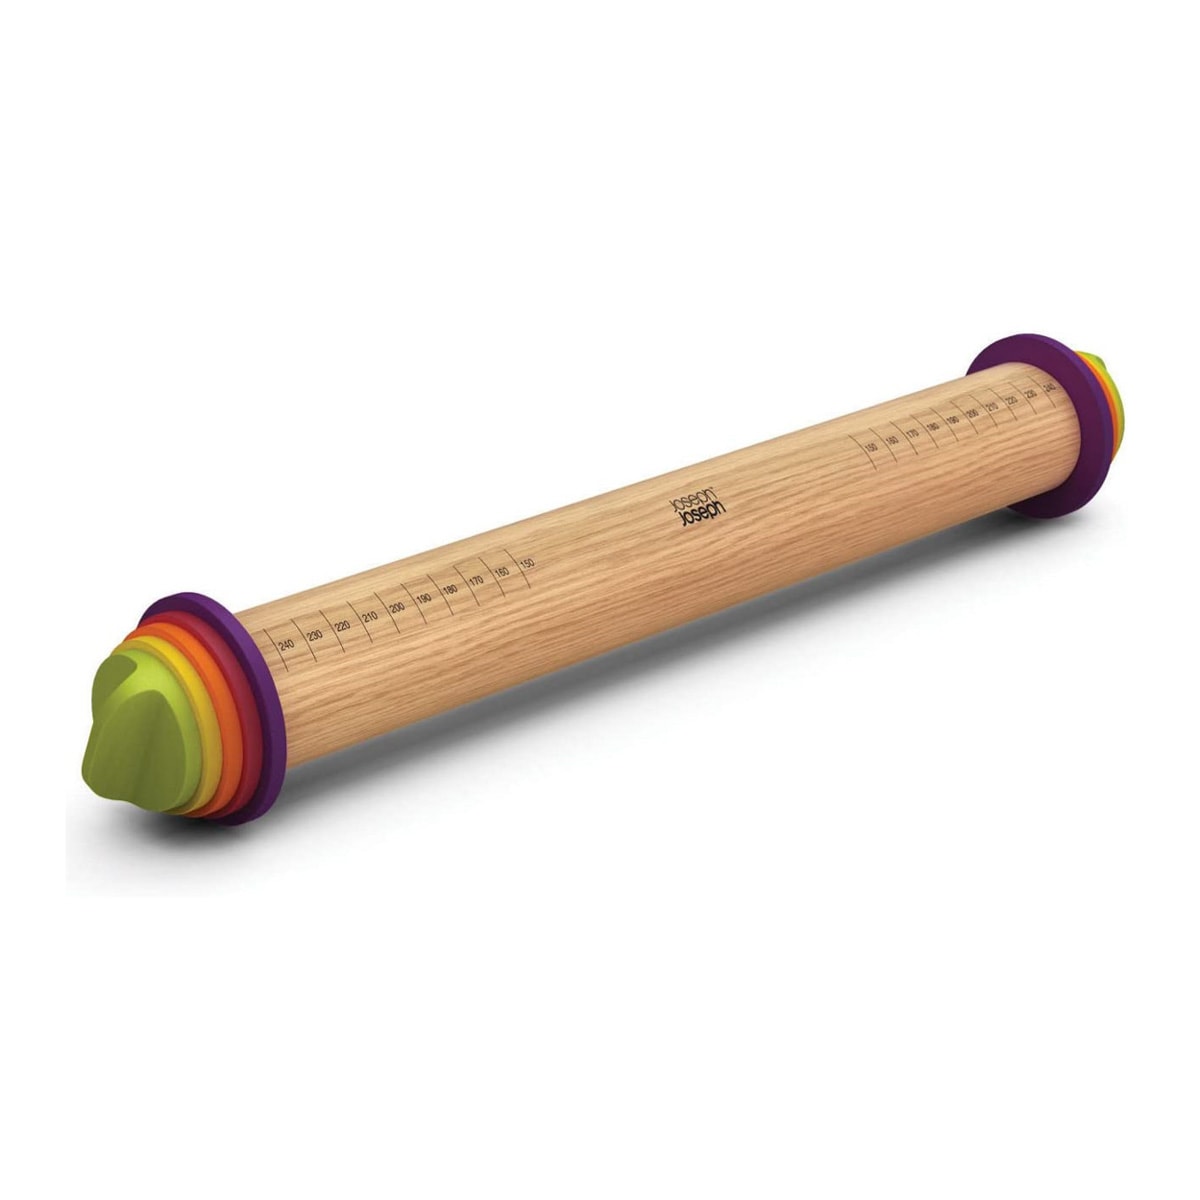 An adjustable rolling pin with removable rings.